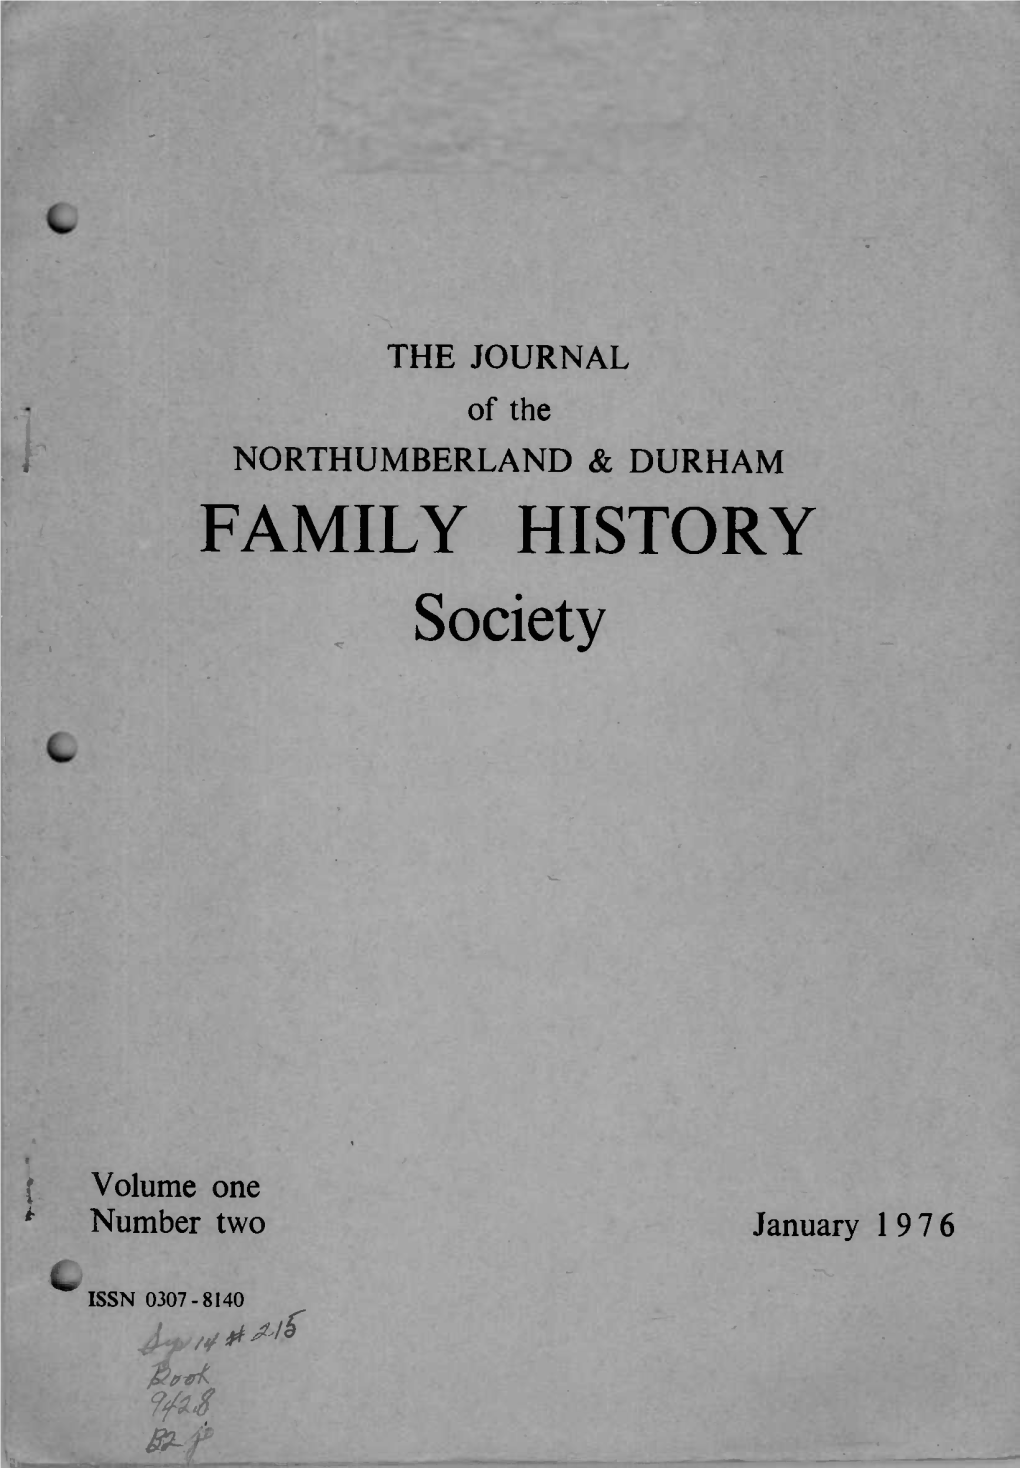 The Journal of the Northumberland & Durham